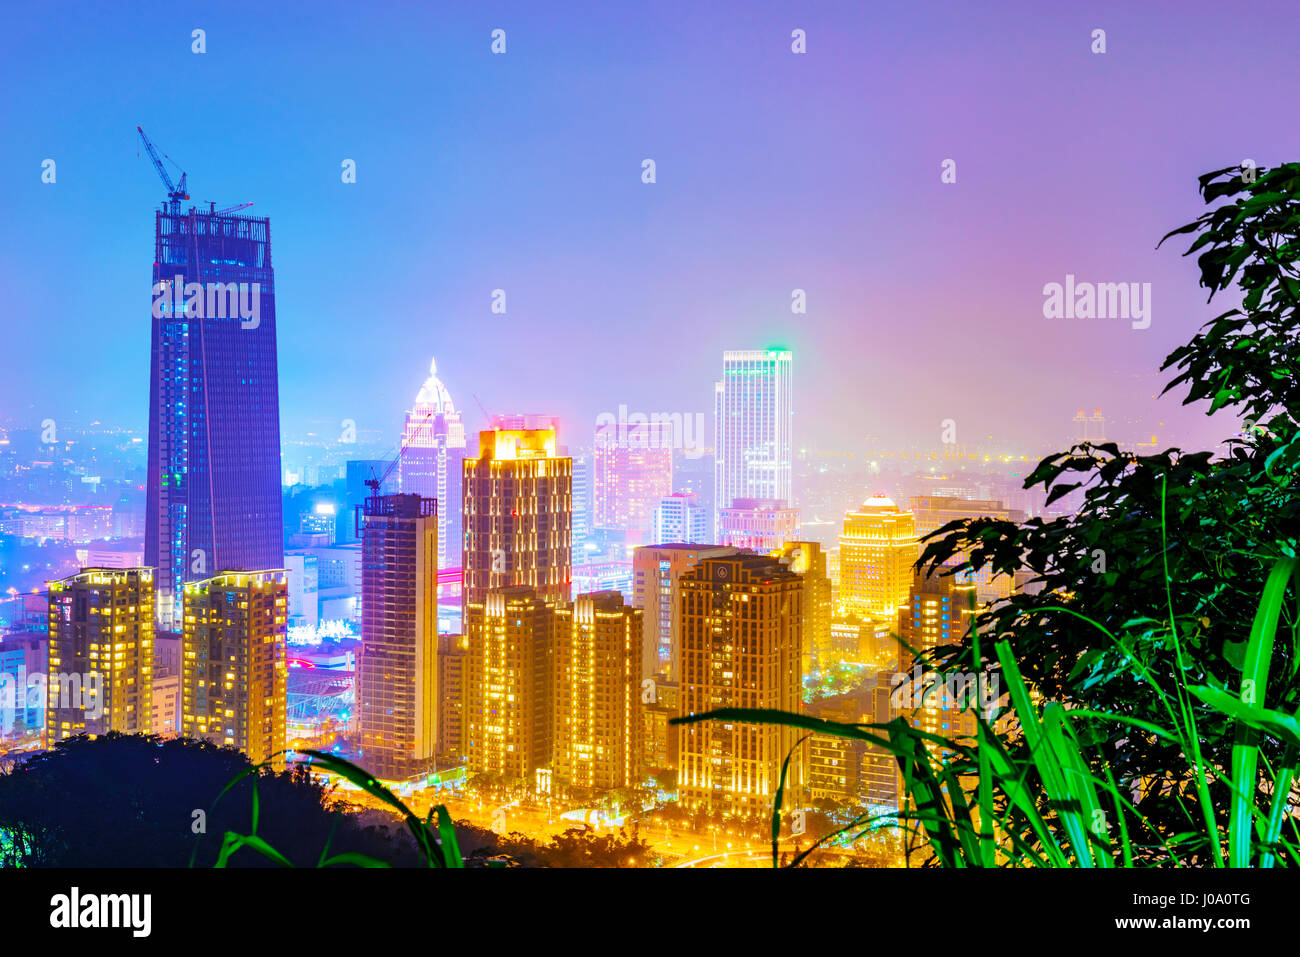 TAIPEI, TAIWAN - MARCH 20: This is a view of Xinyi financial district in the downtown area of Taipei taken from a mountain at night on March 20, 2017  Stock Photo